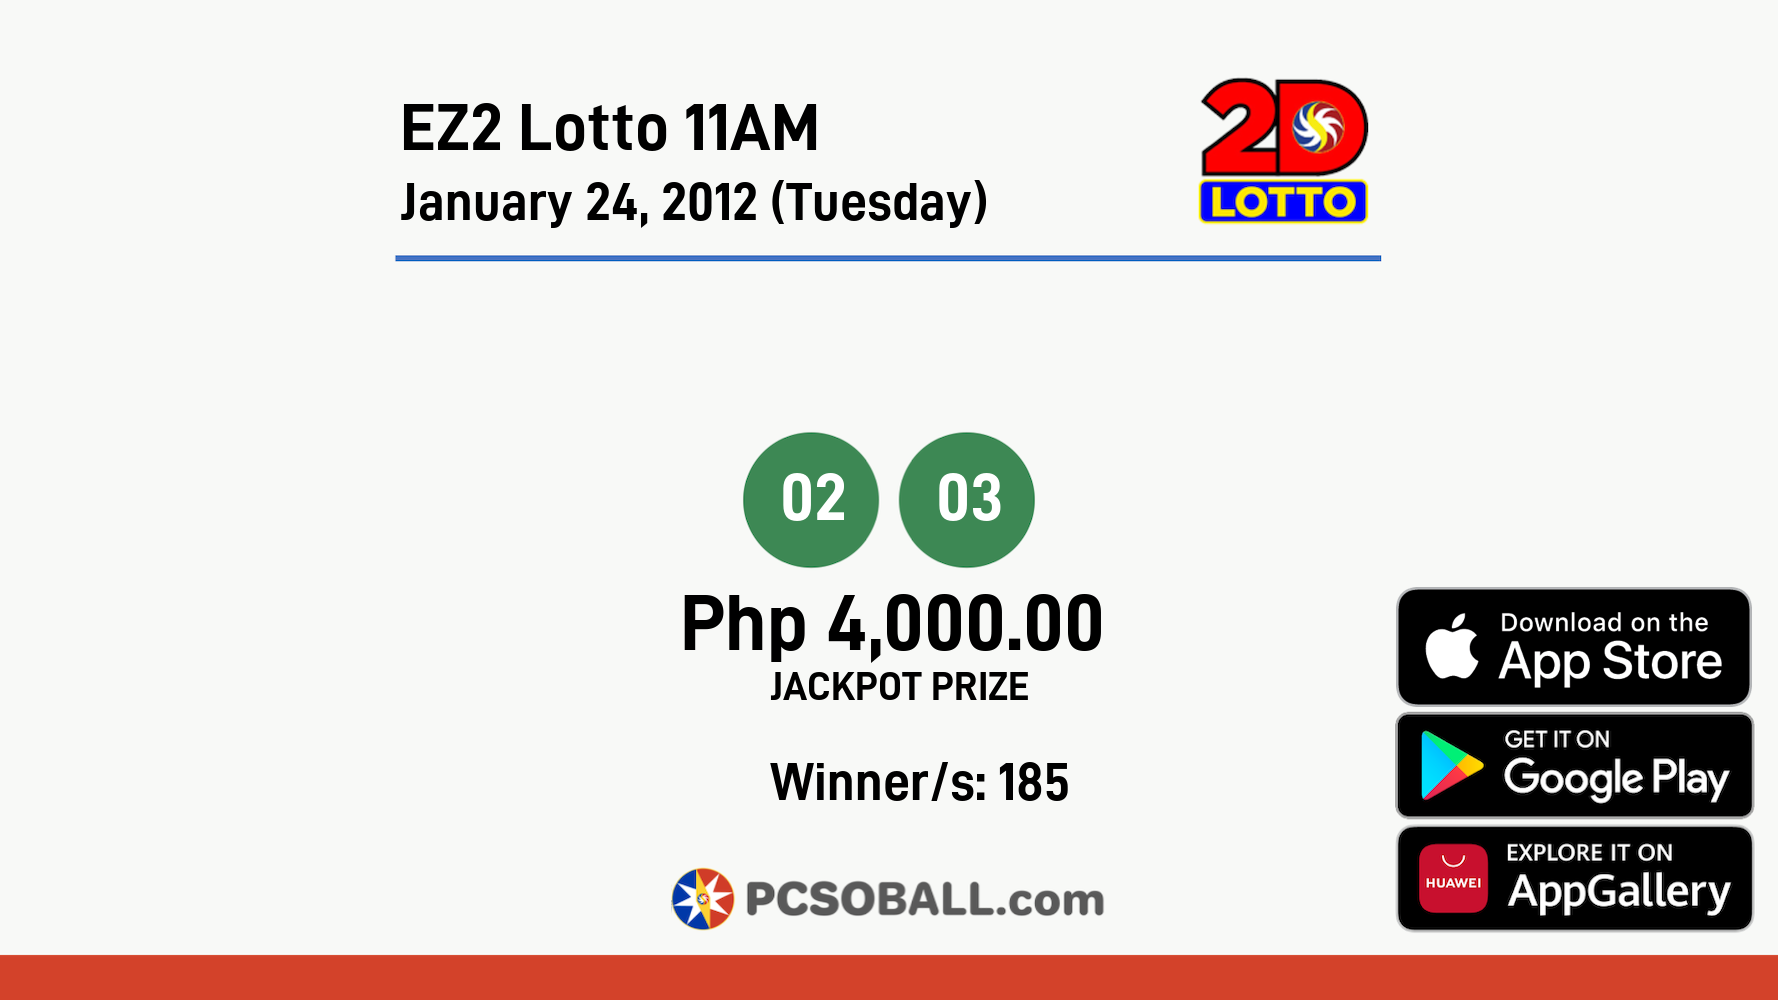 EZ2 Lotto 11AM January 24, 2012 (Tuesday) Result